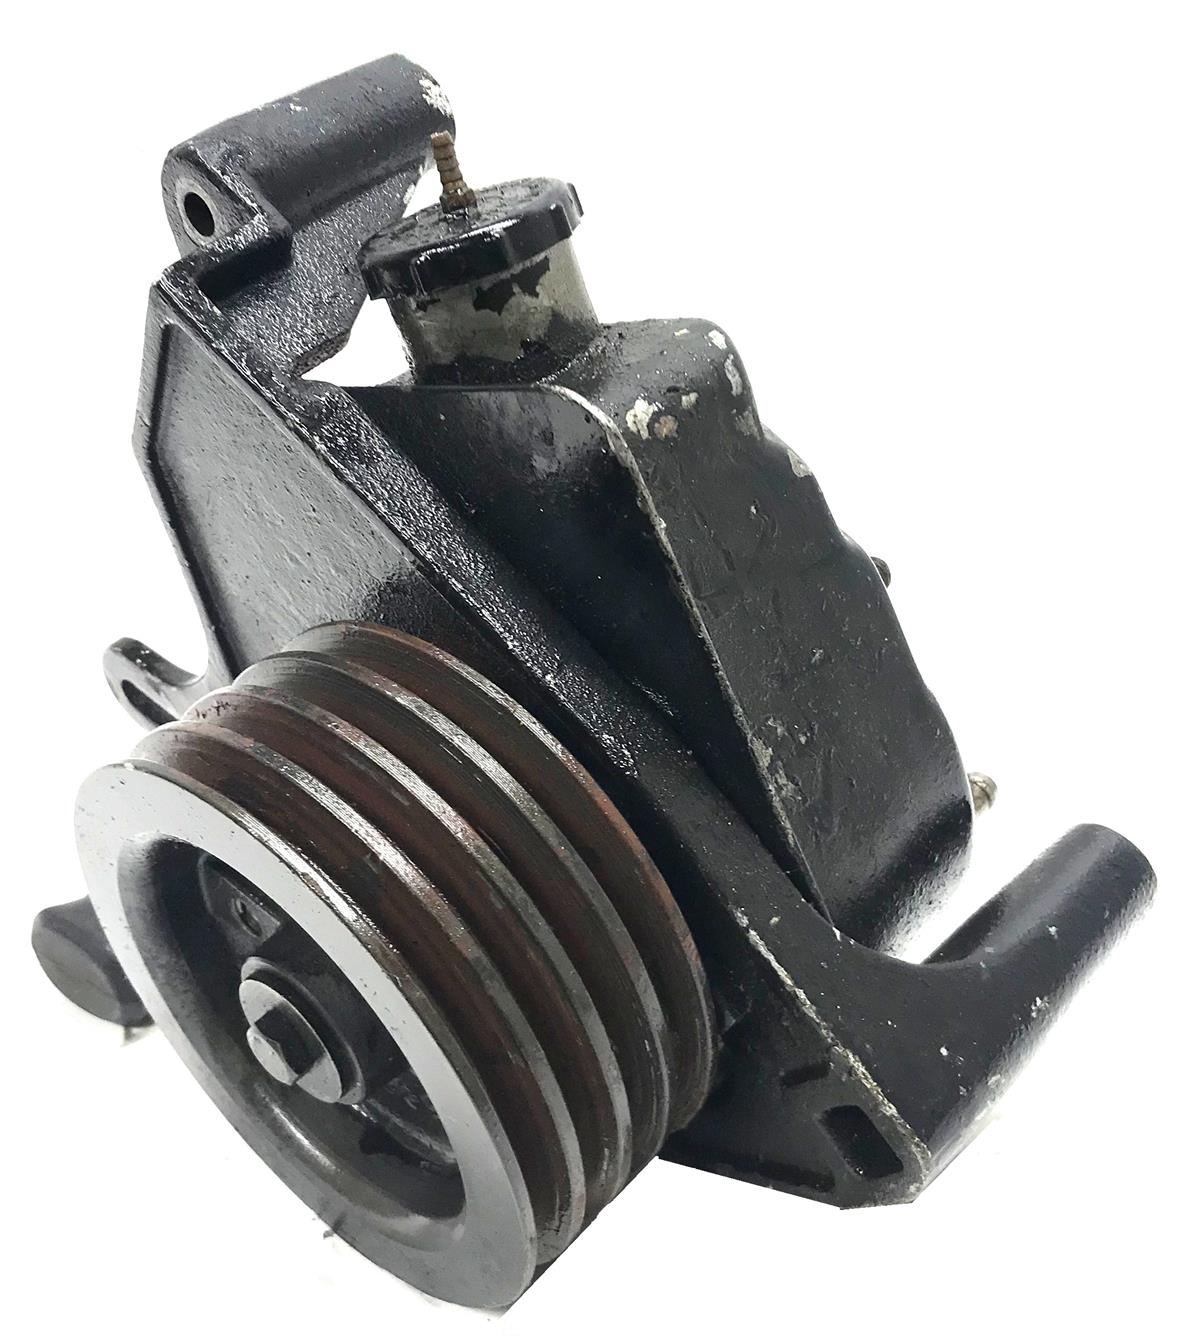 HM-1120 | HM-1120  Power Steering Pump Assembly With Pulley HMMWV (USED) (11).jpg